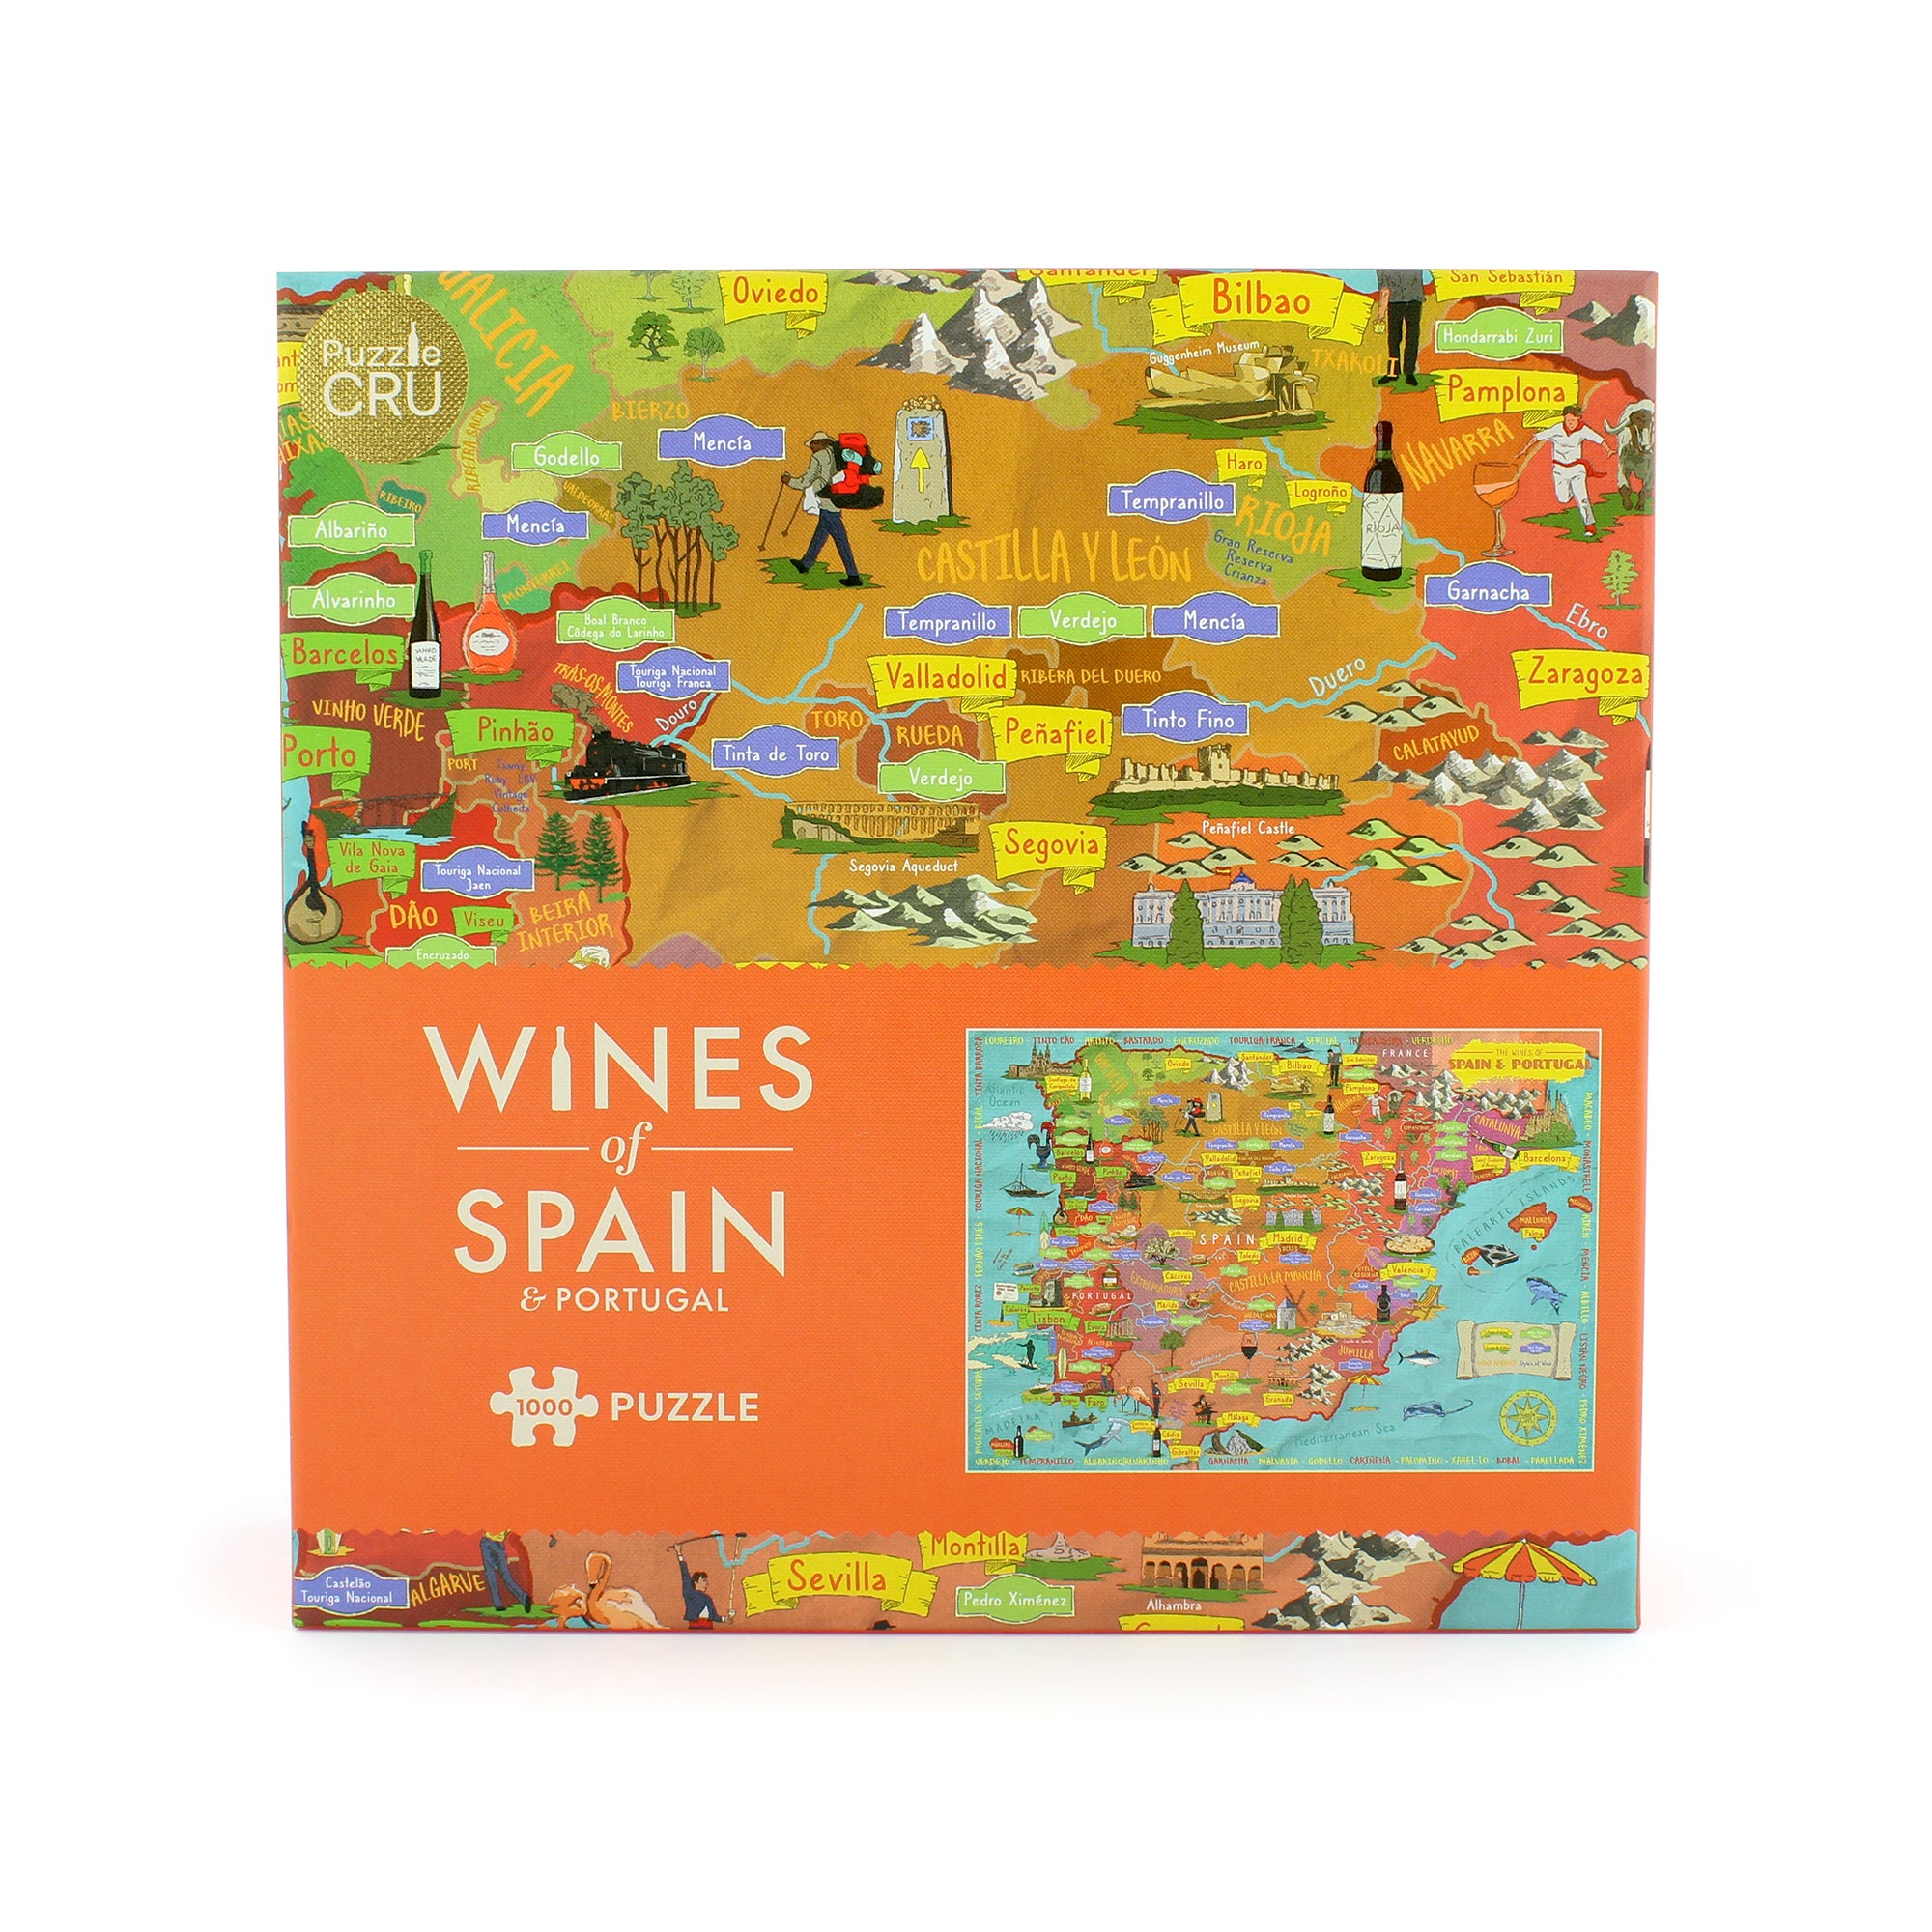 Wines of Spain & Portugal Jigsaw Puzzle